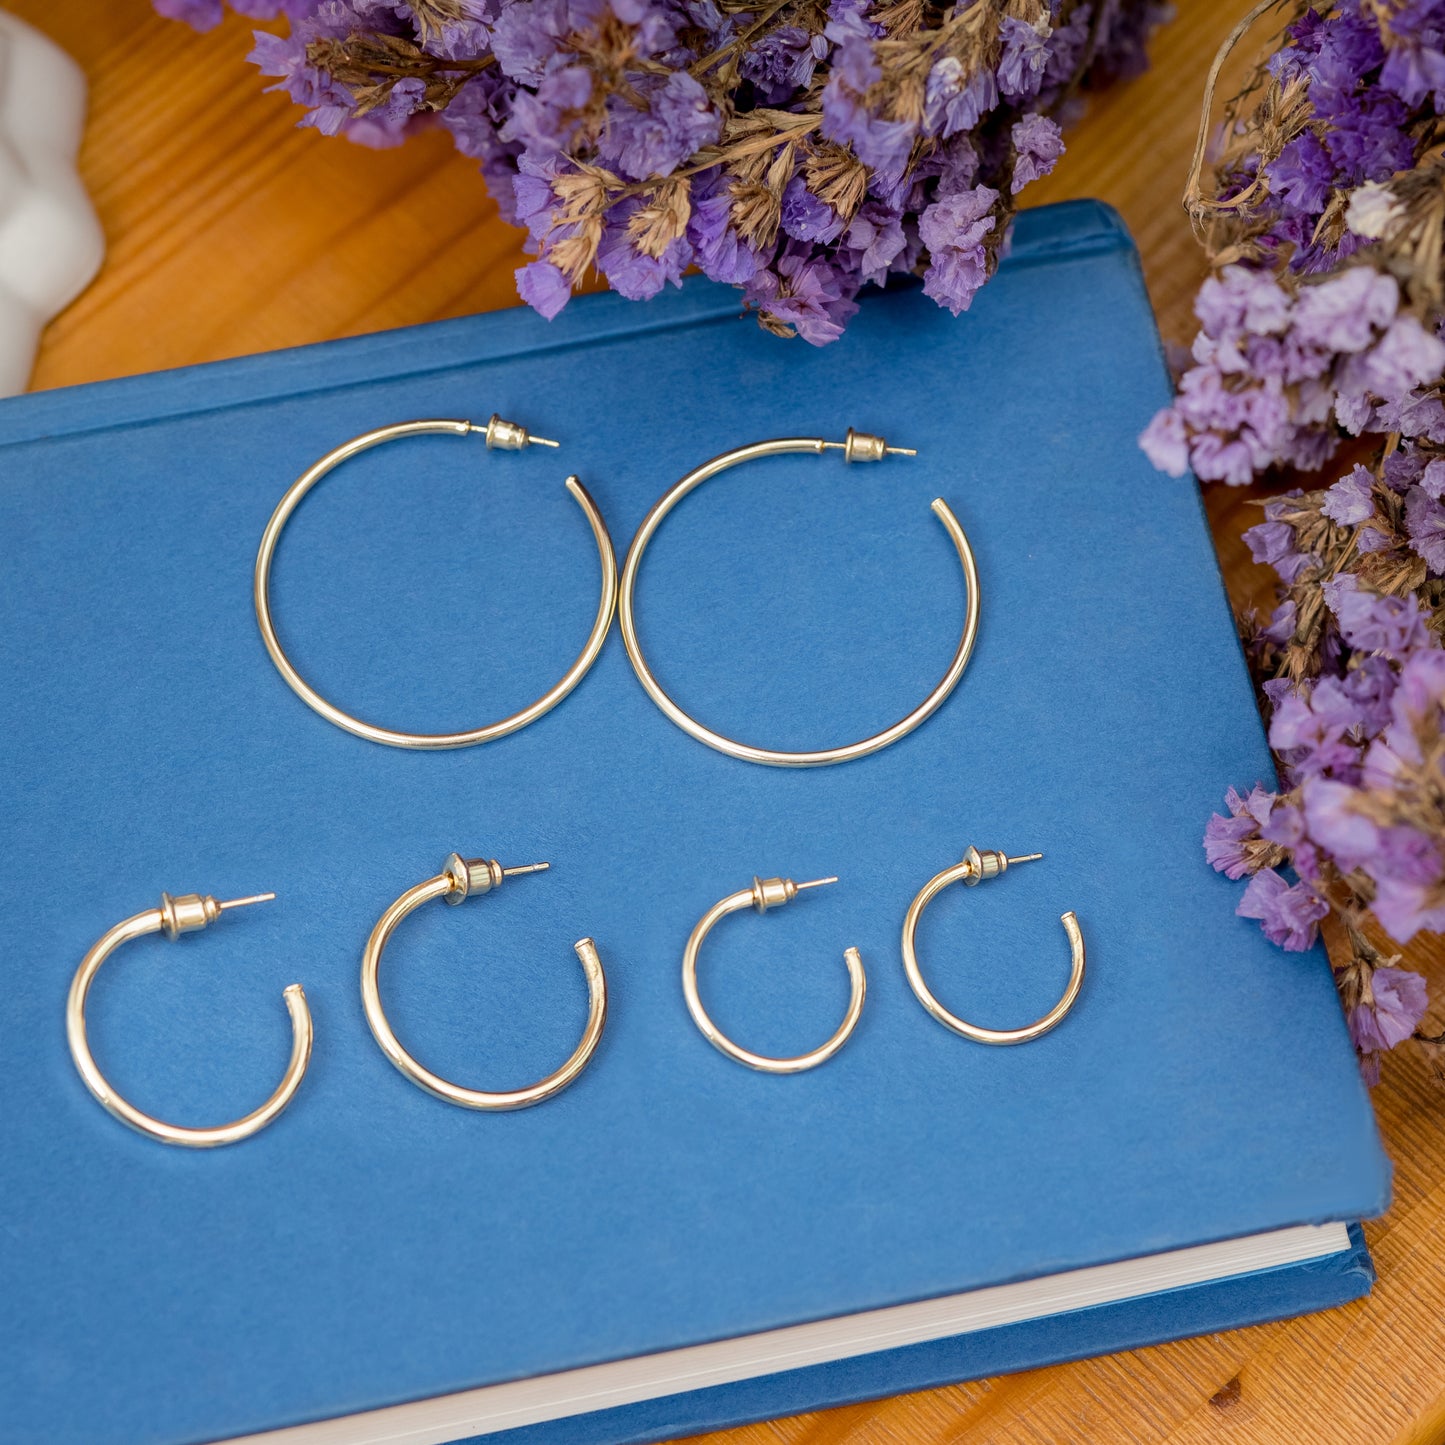 14K Gold Plated Lightweight Open Hoop Earrings with Sterling Silver Posts